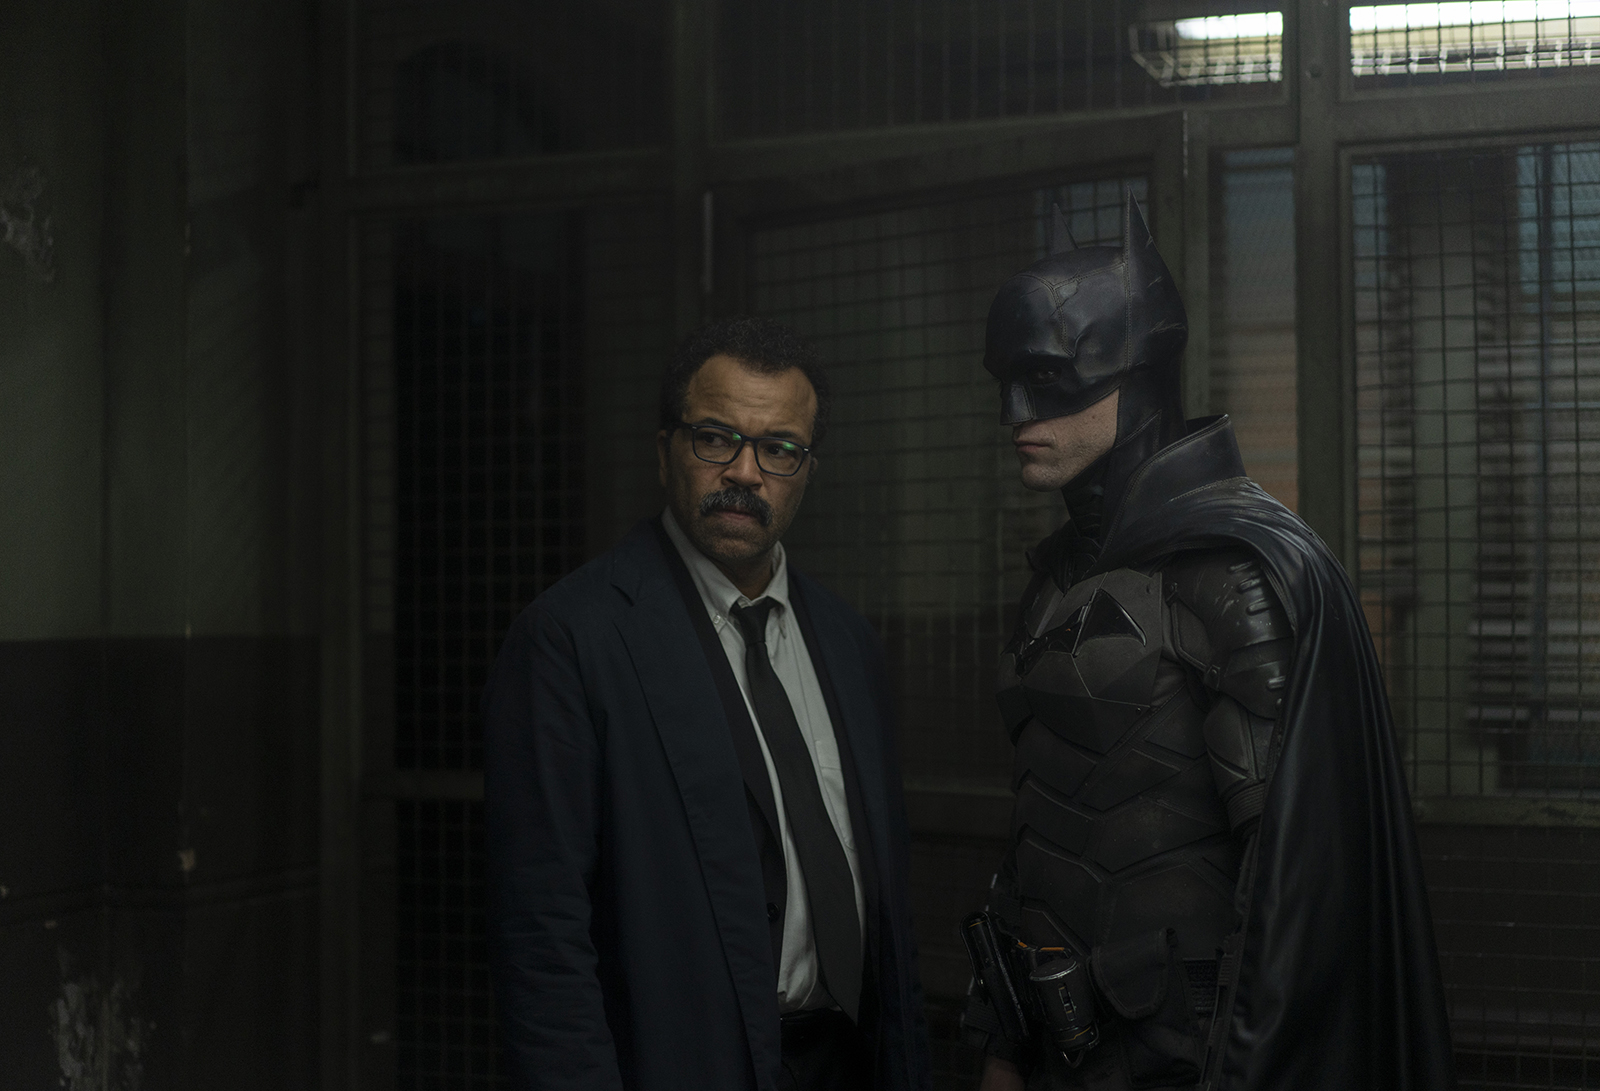 Commissioner James Gordon talks to Batman as they gaze to the right in a police station.